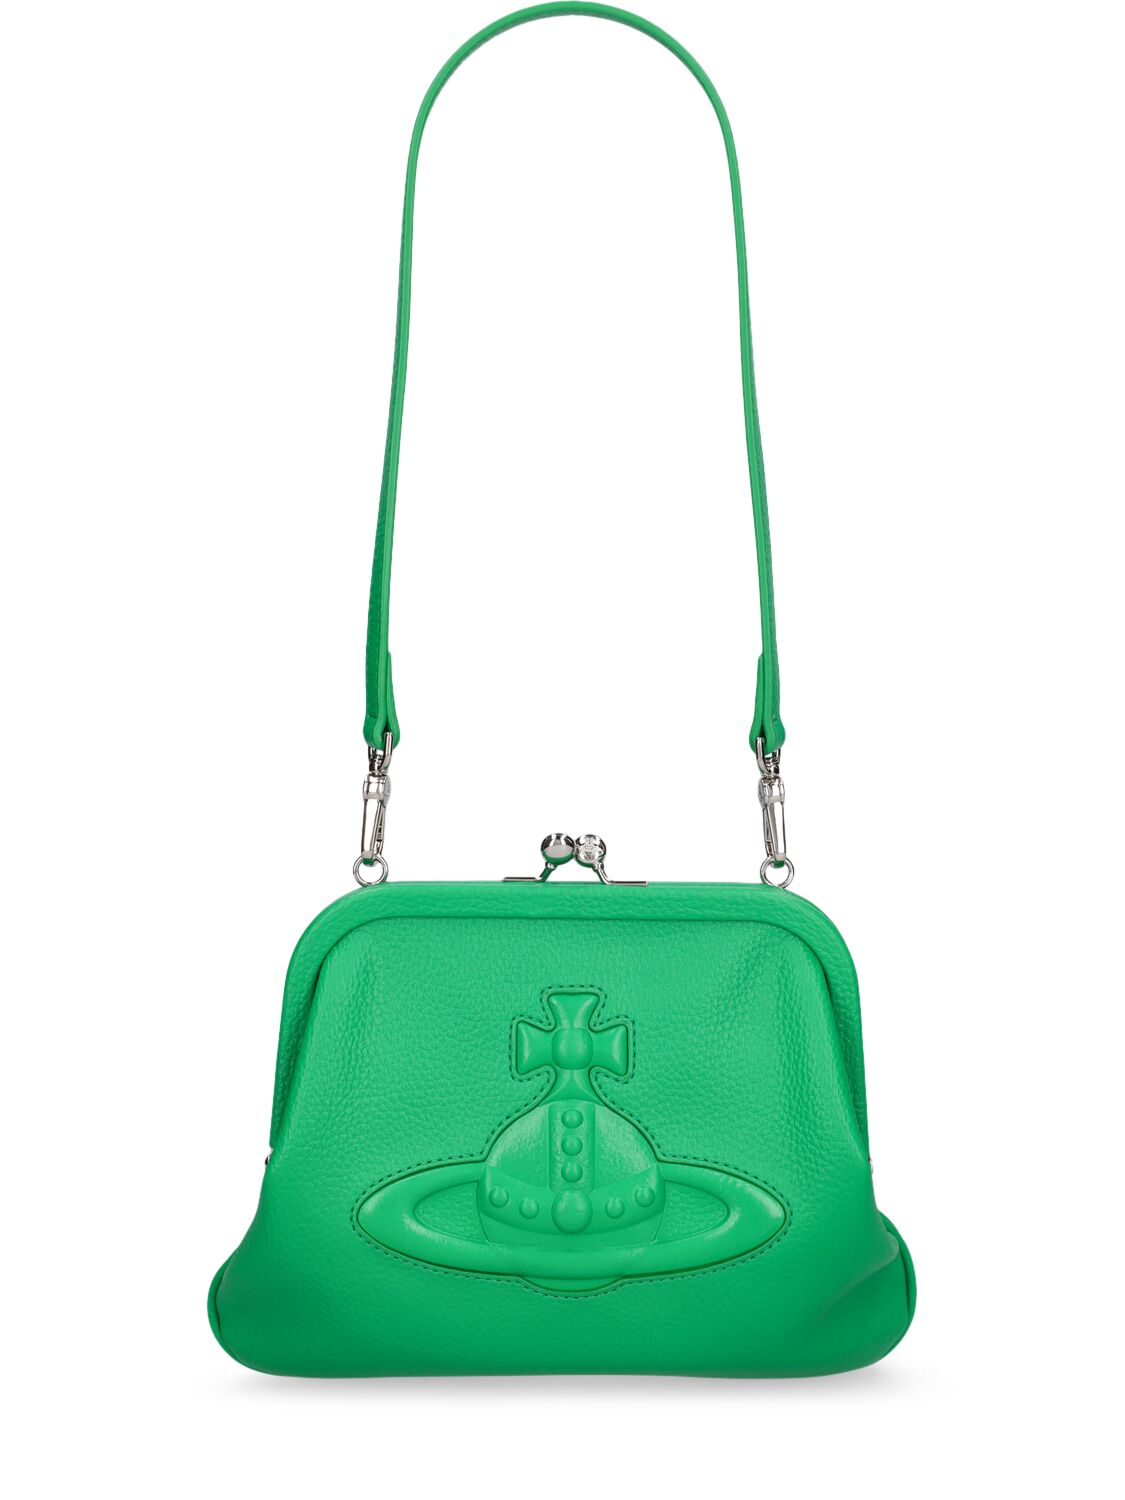 Vivienne Westwood Vivienne's Faux Leather Embossed Clutch In Bright Green